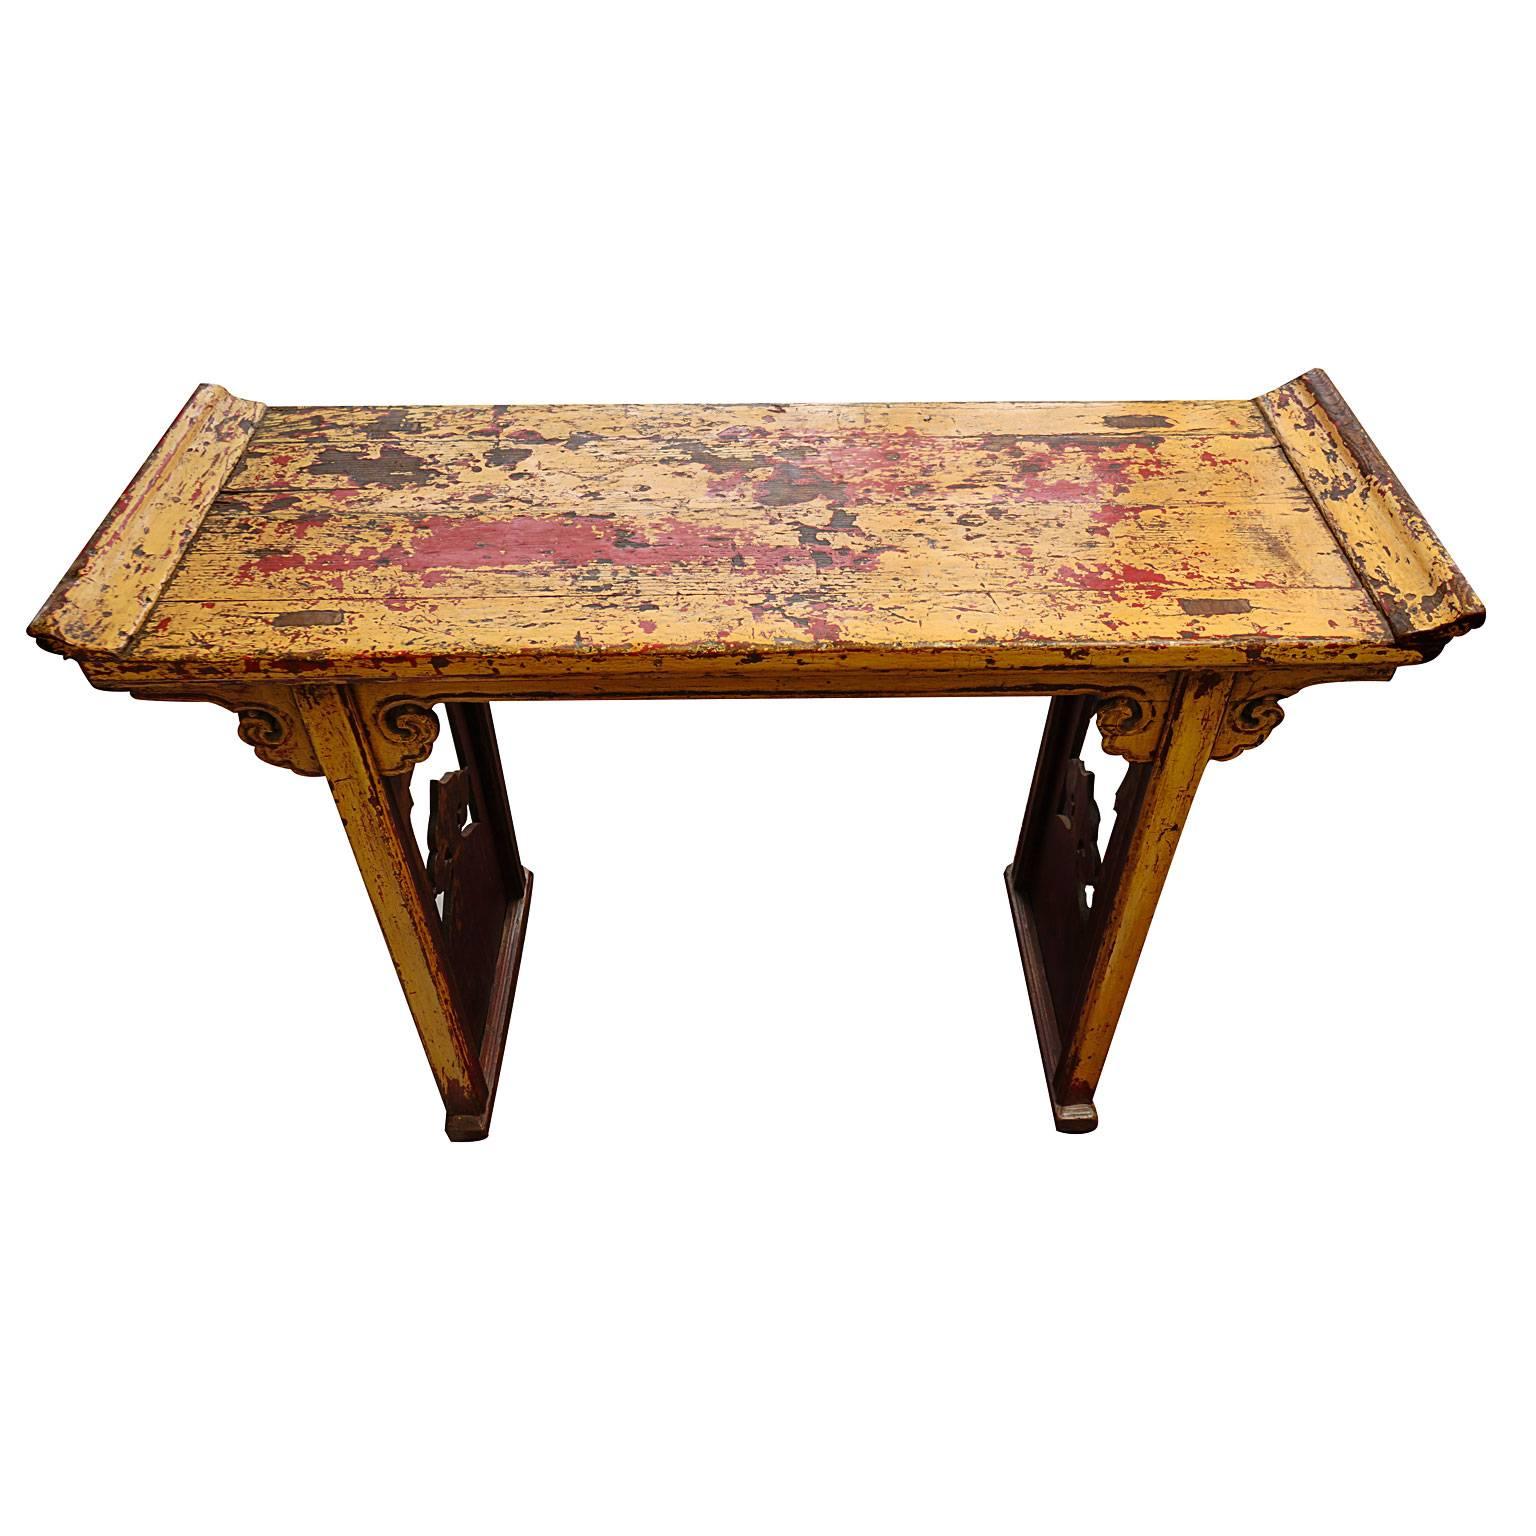 19th Century Chinese Painted Alter Table from the Ching Dynasty For Sale